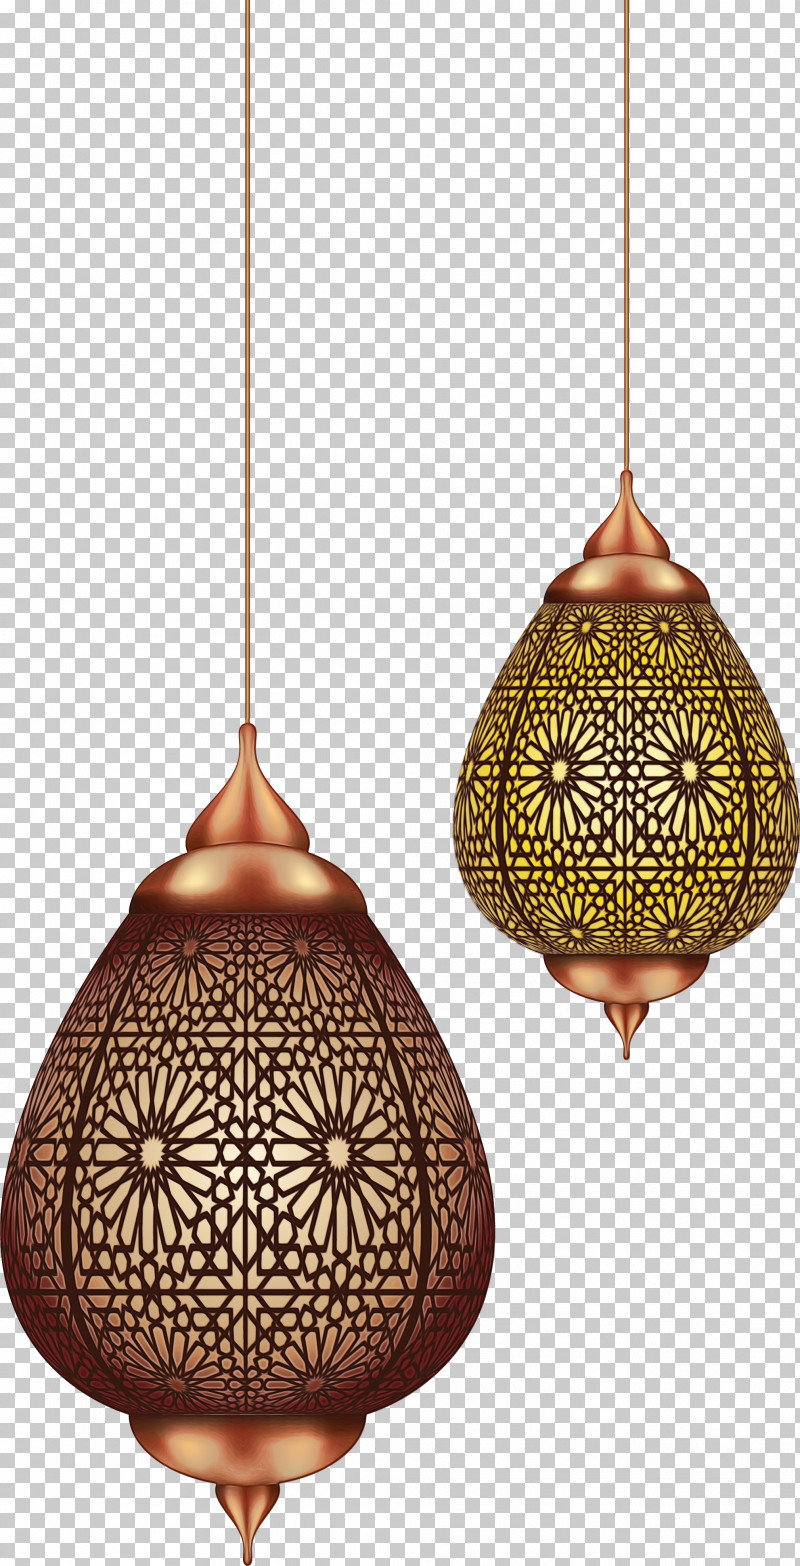 Lighting Light Fixture Lighting Accessory Lampshade Lamp PNG, Clipart, Ceiling, Ceiling Fixture, Copper, Interior Design, Lamp Free PNG Download